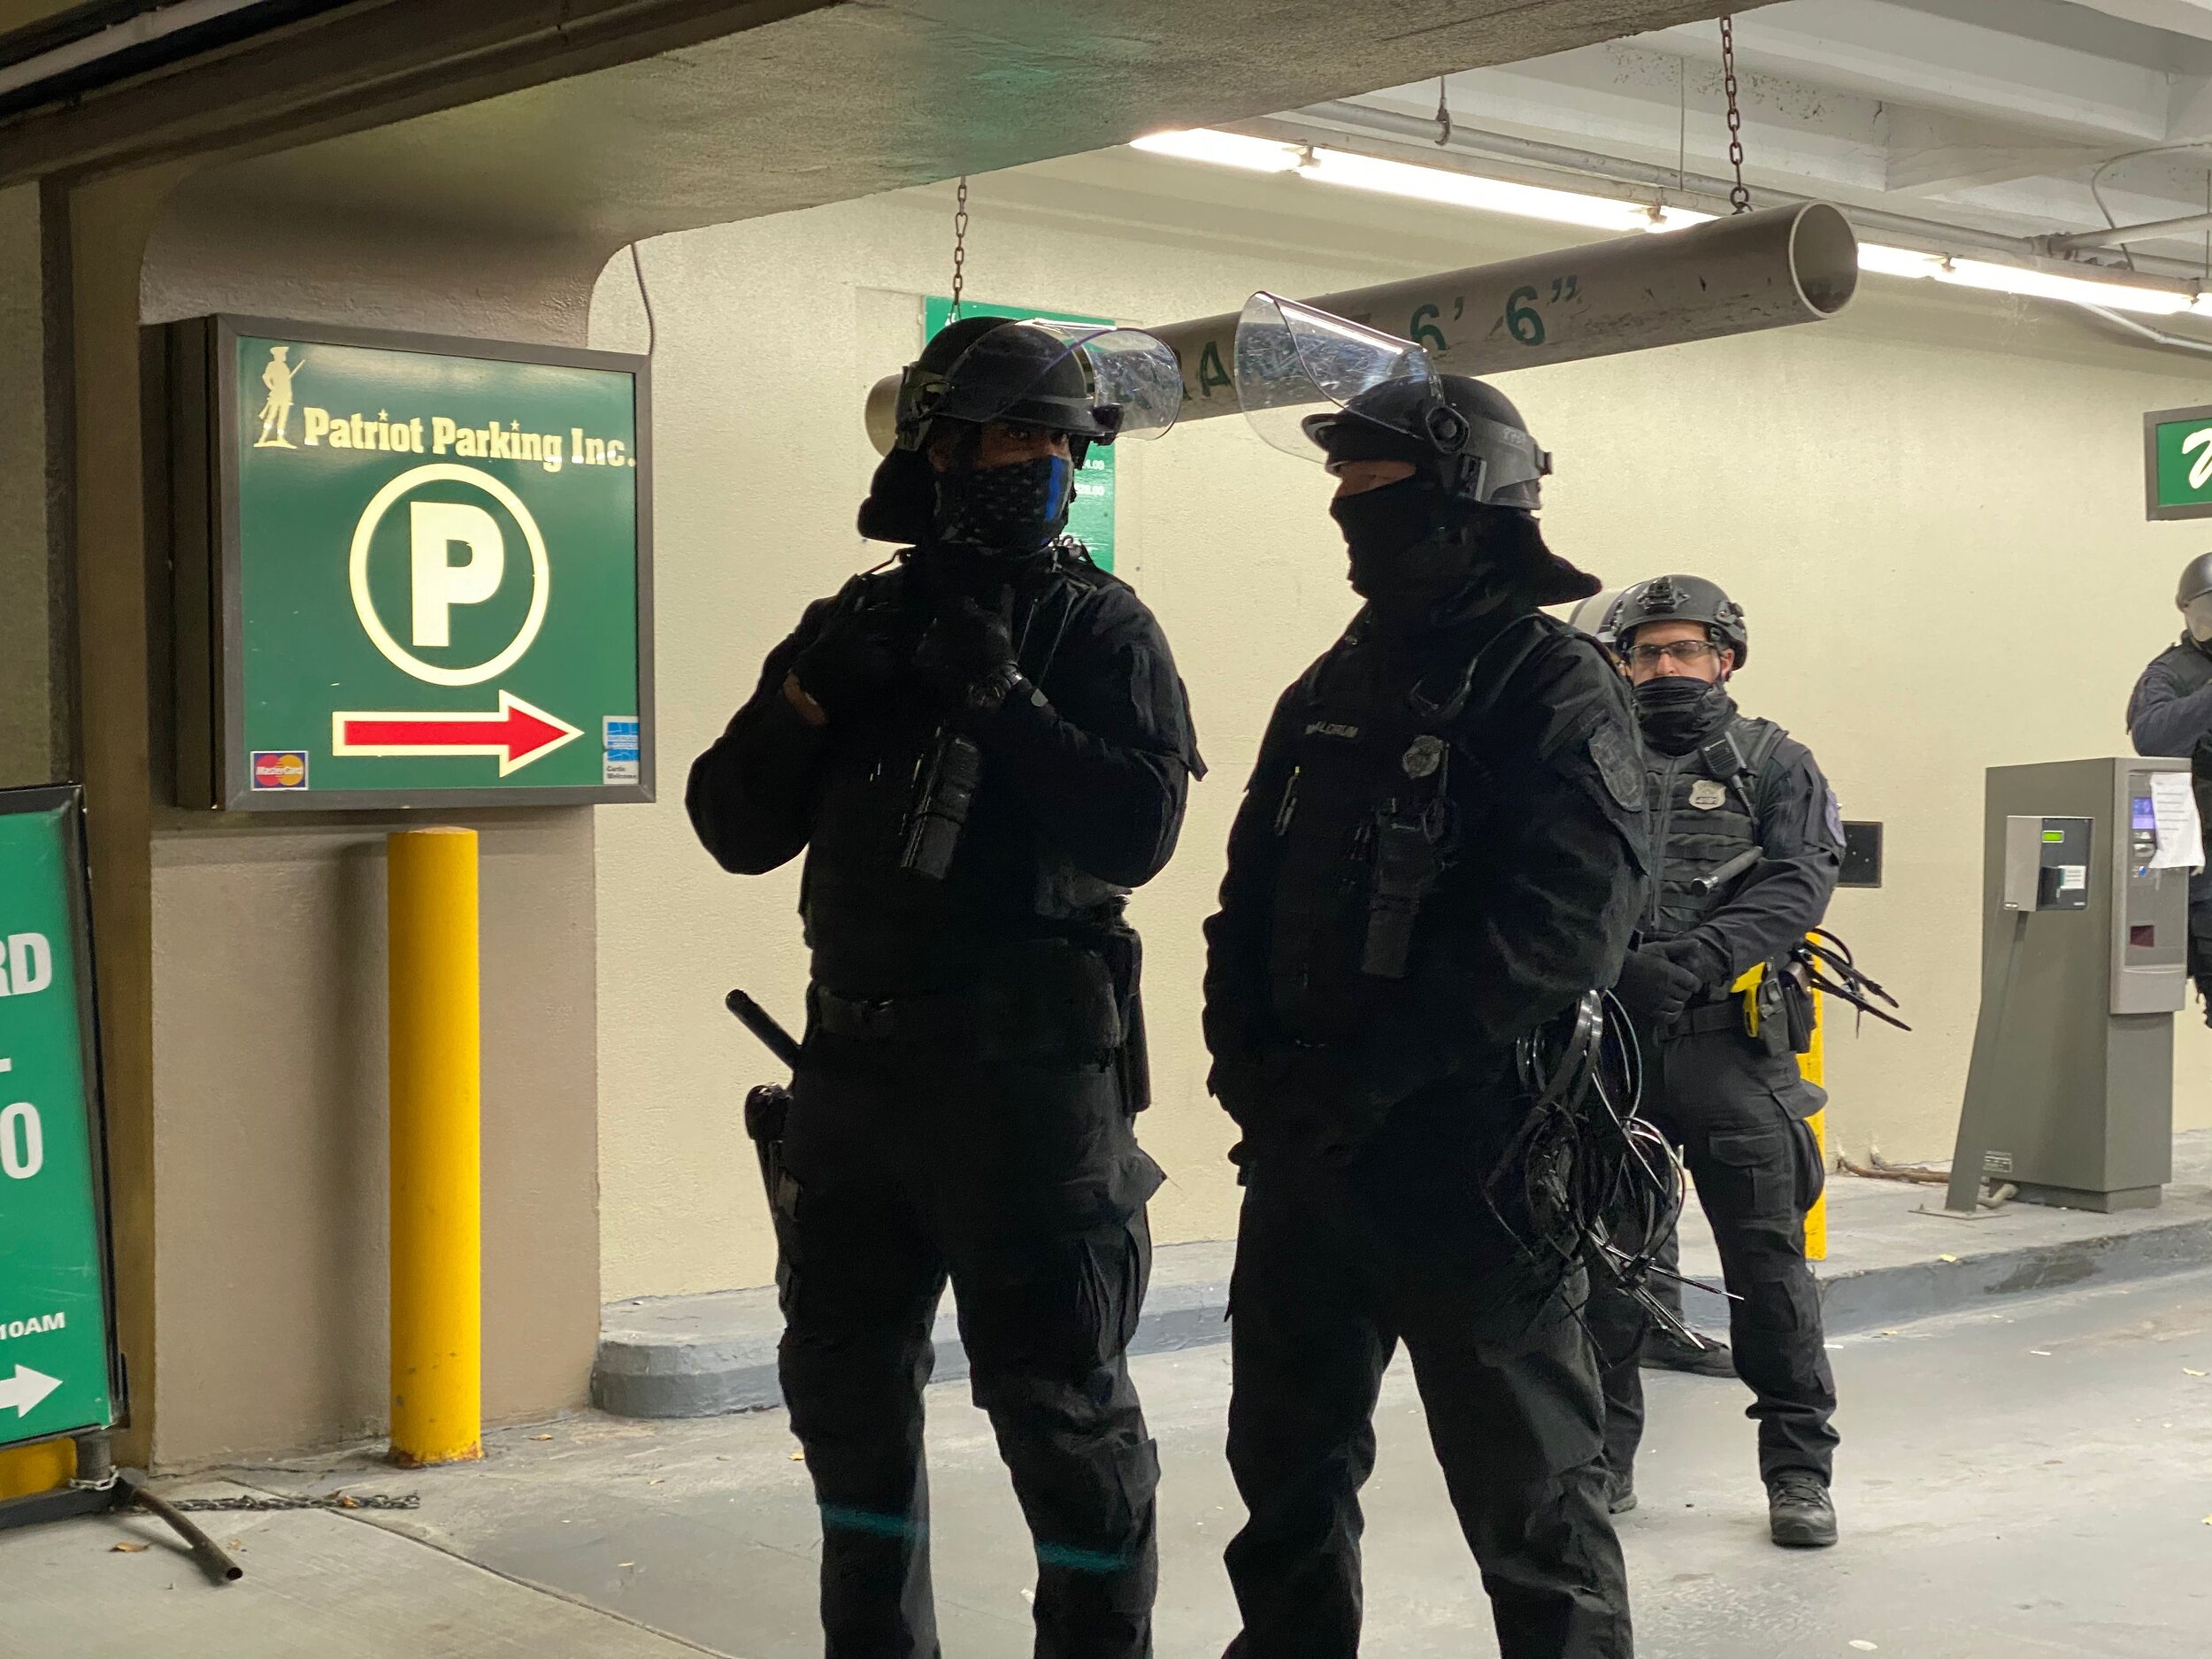 Counter-terrorism police in the parking garage next to the Holiday Inn.